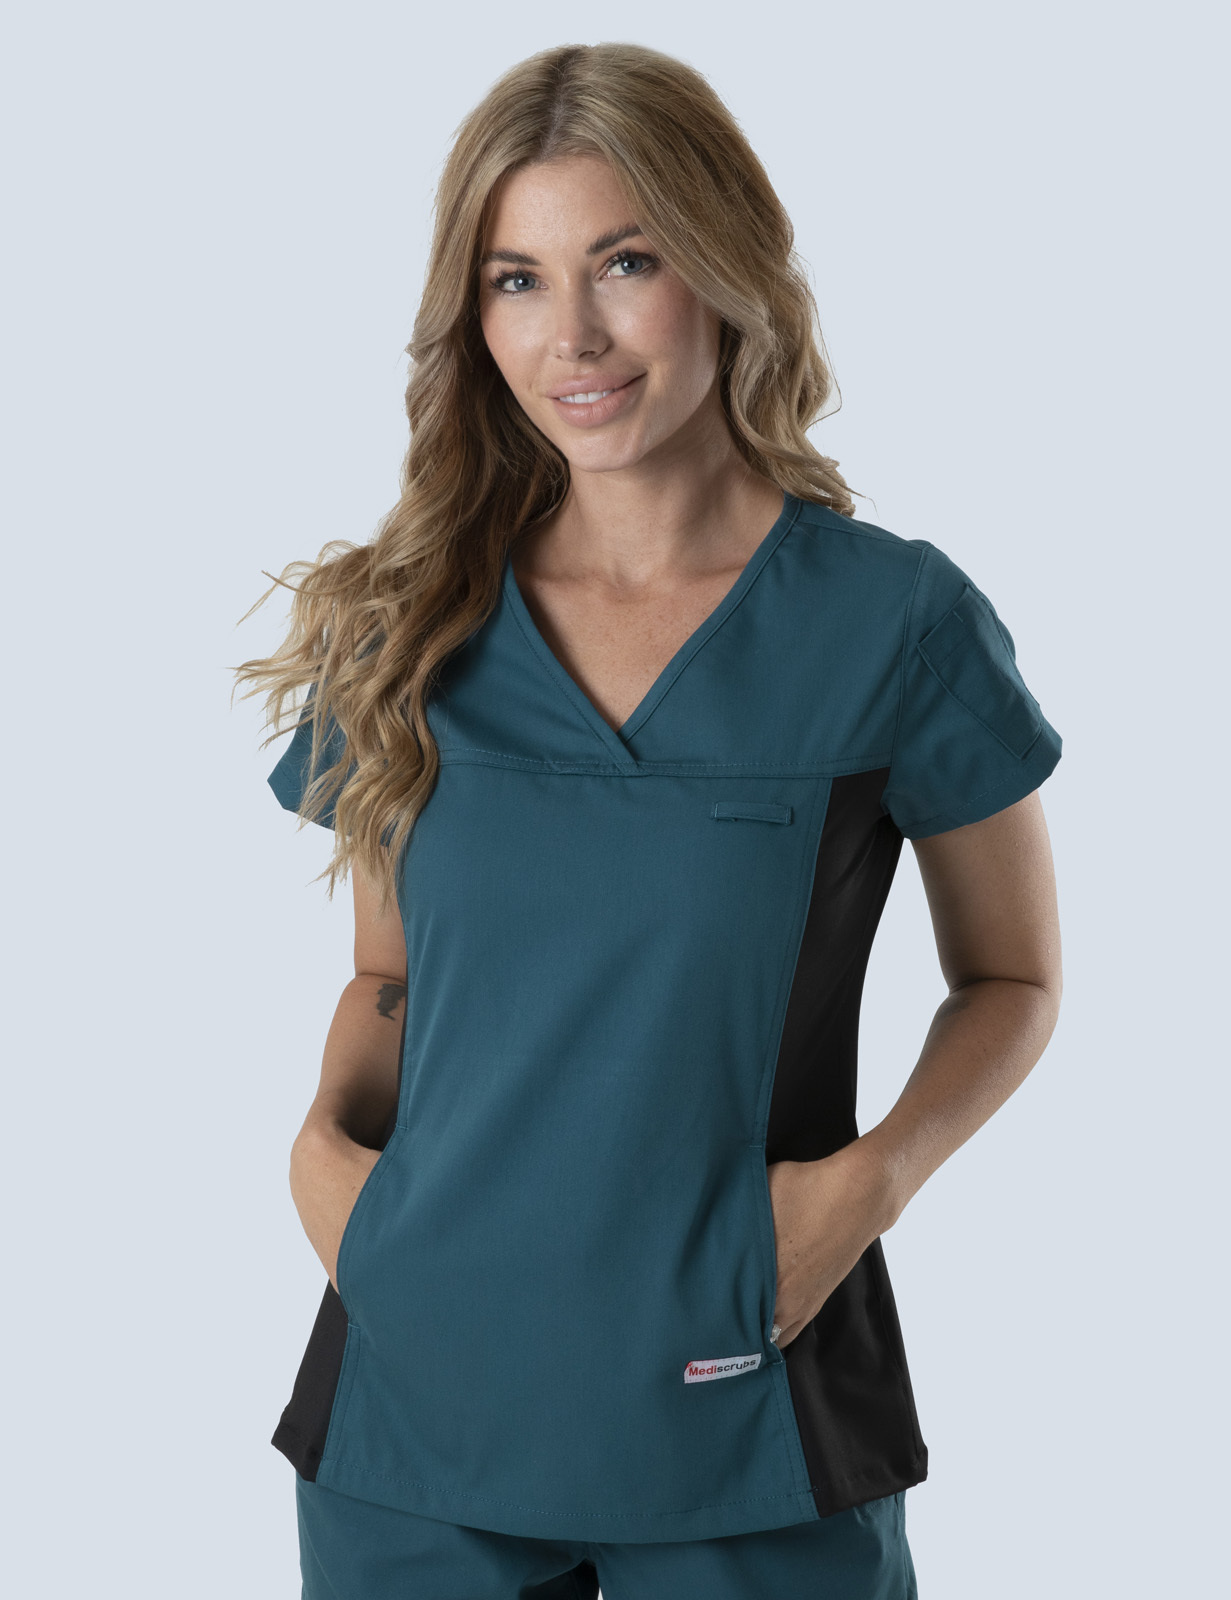 Women's Fit Solid Scrub Top With Spandex Panel - Caribbean - X Small